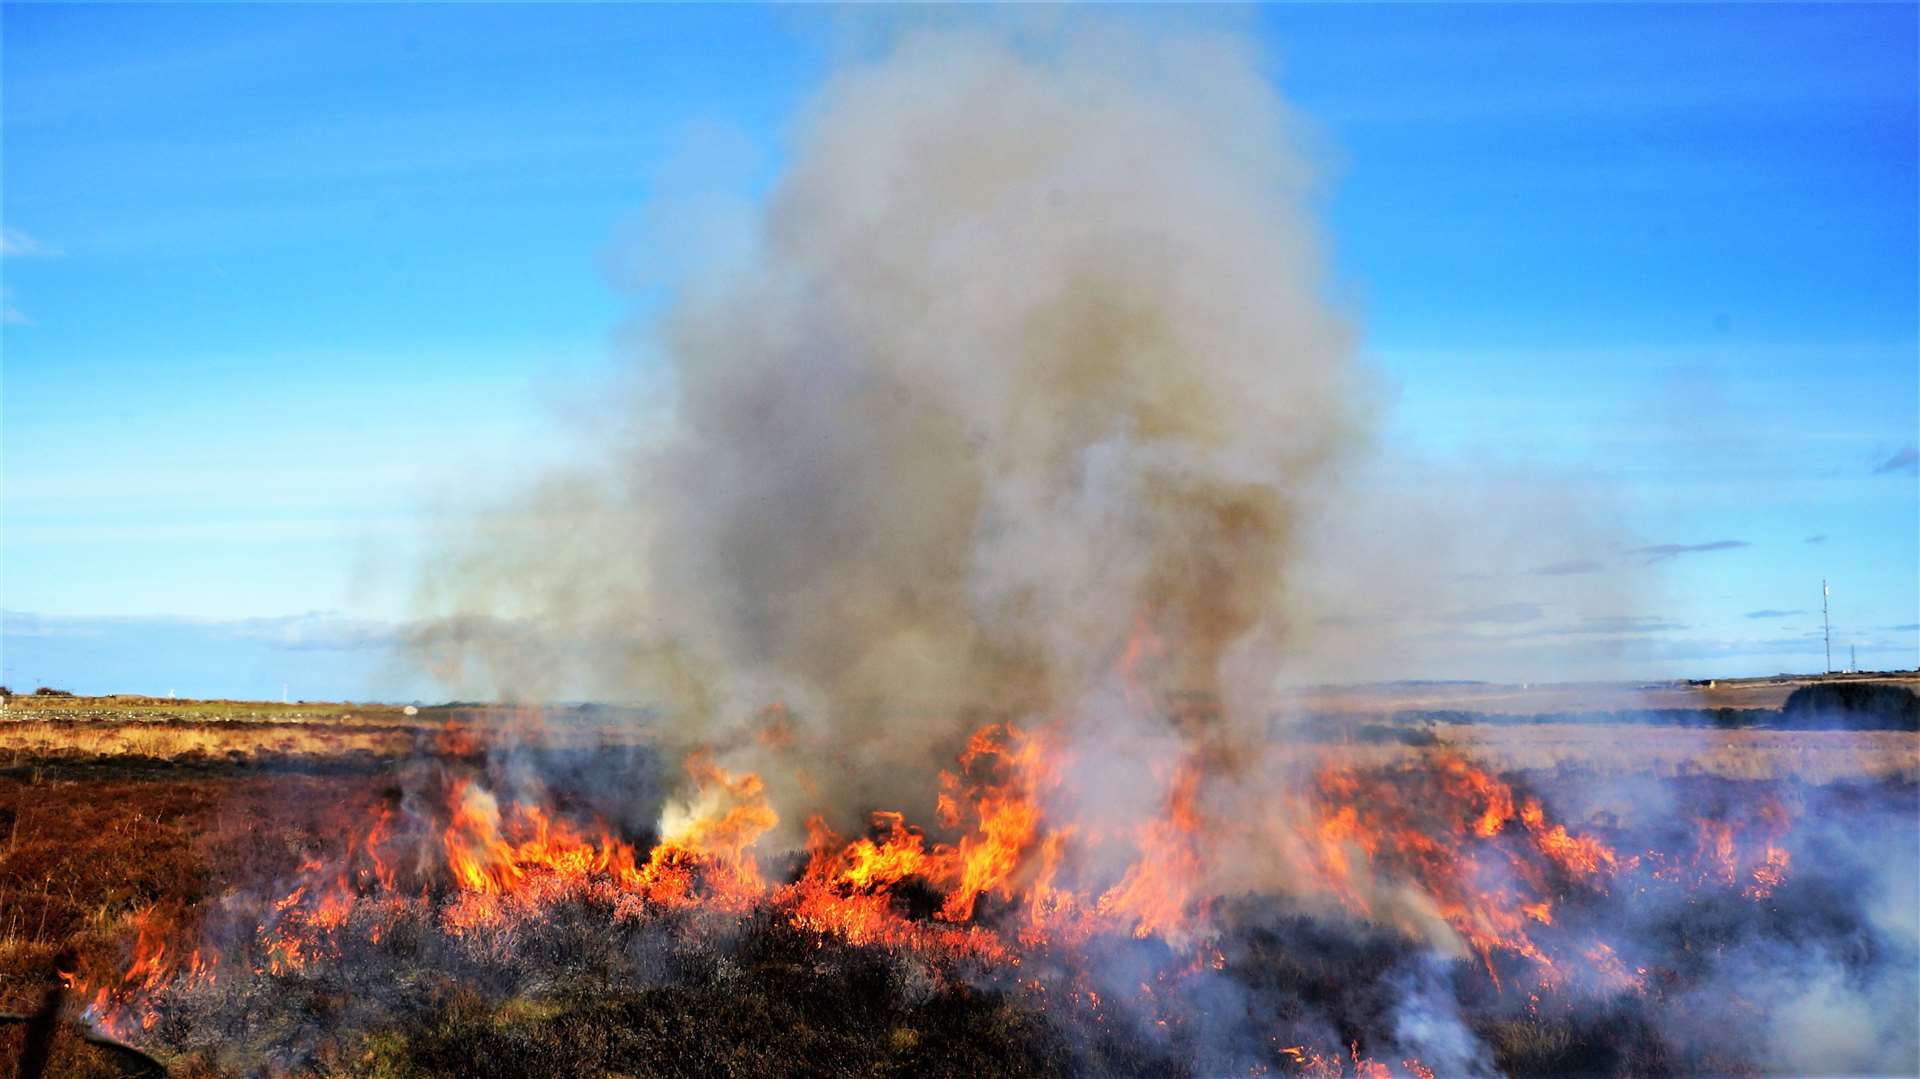 The public is warned to safeguard against creating wildfires this weekend. Picture: DGS